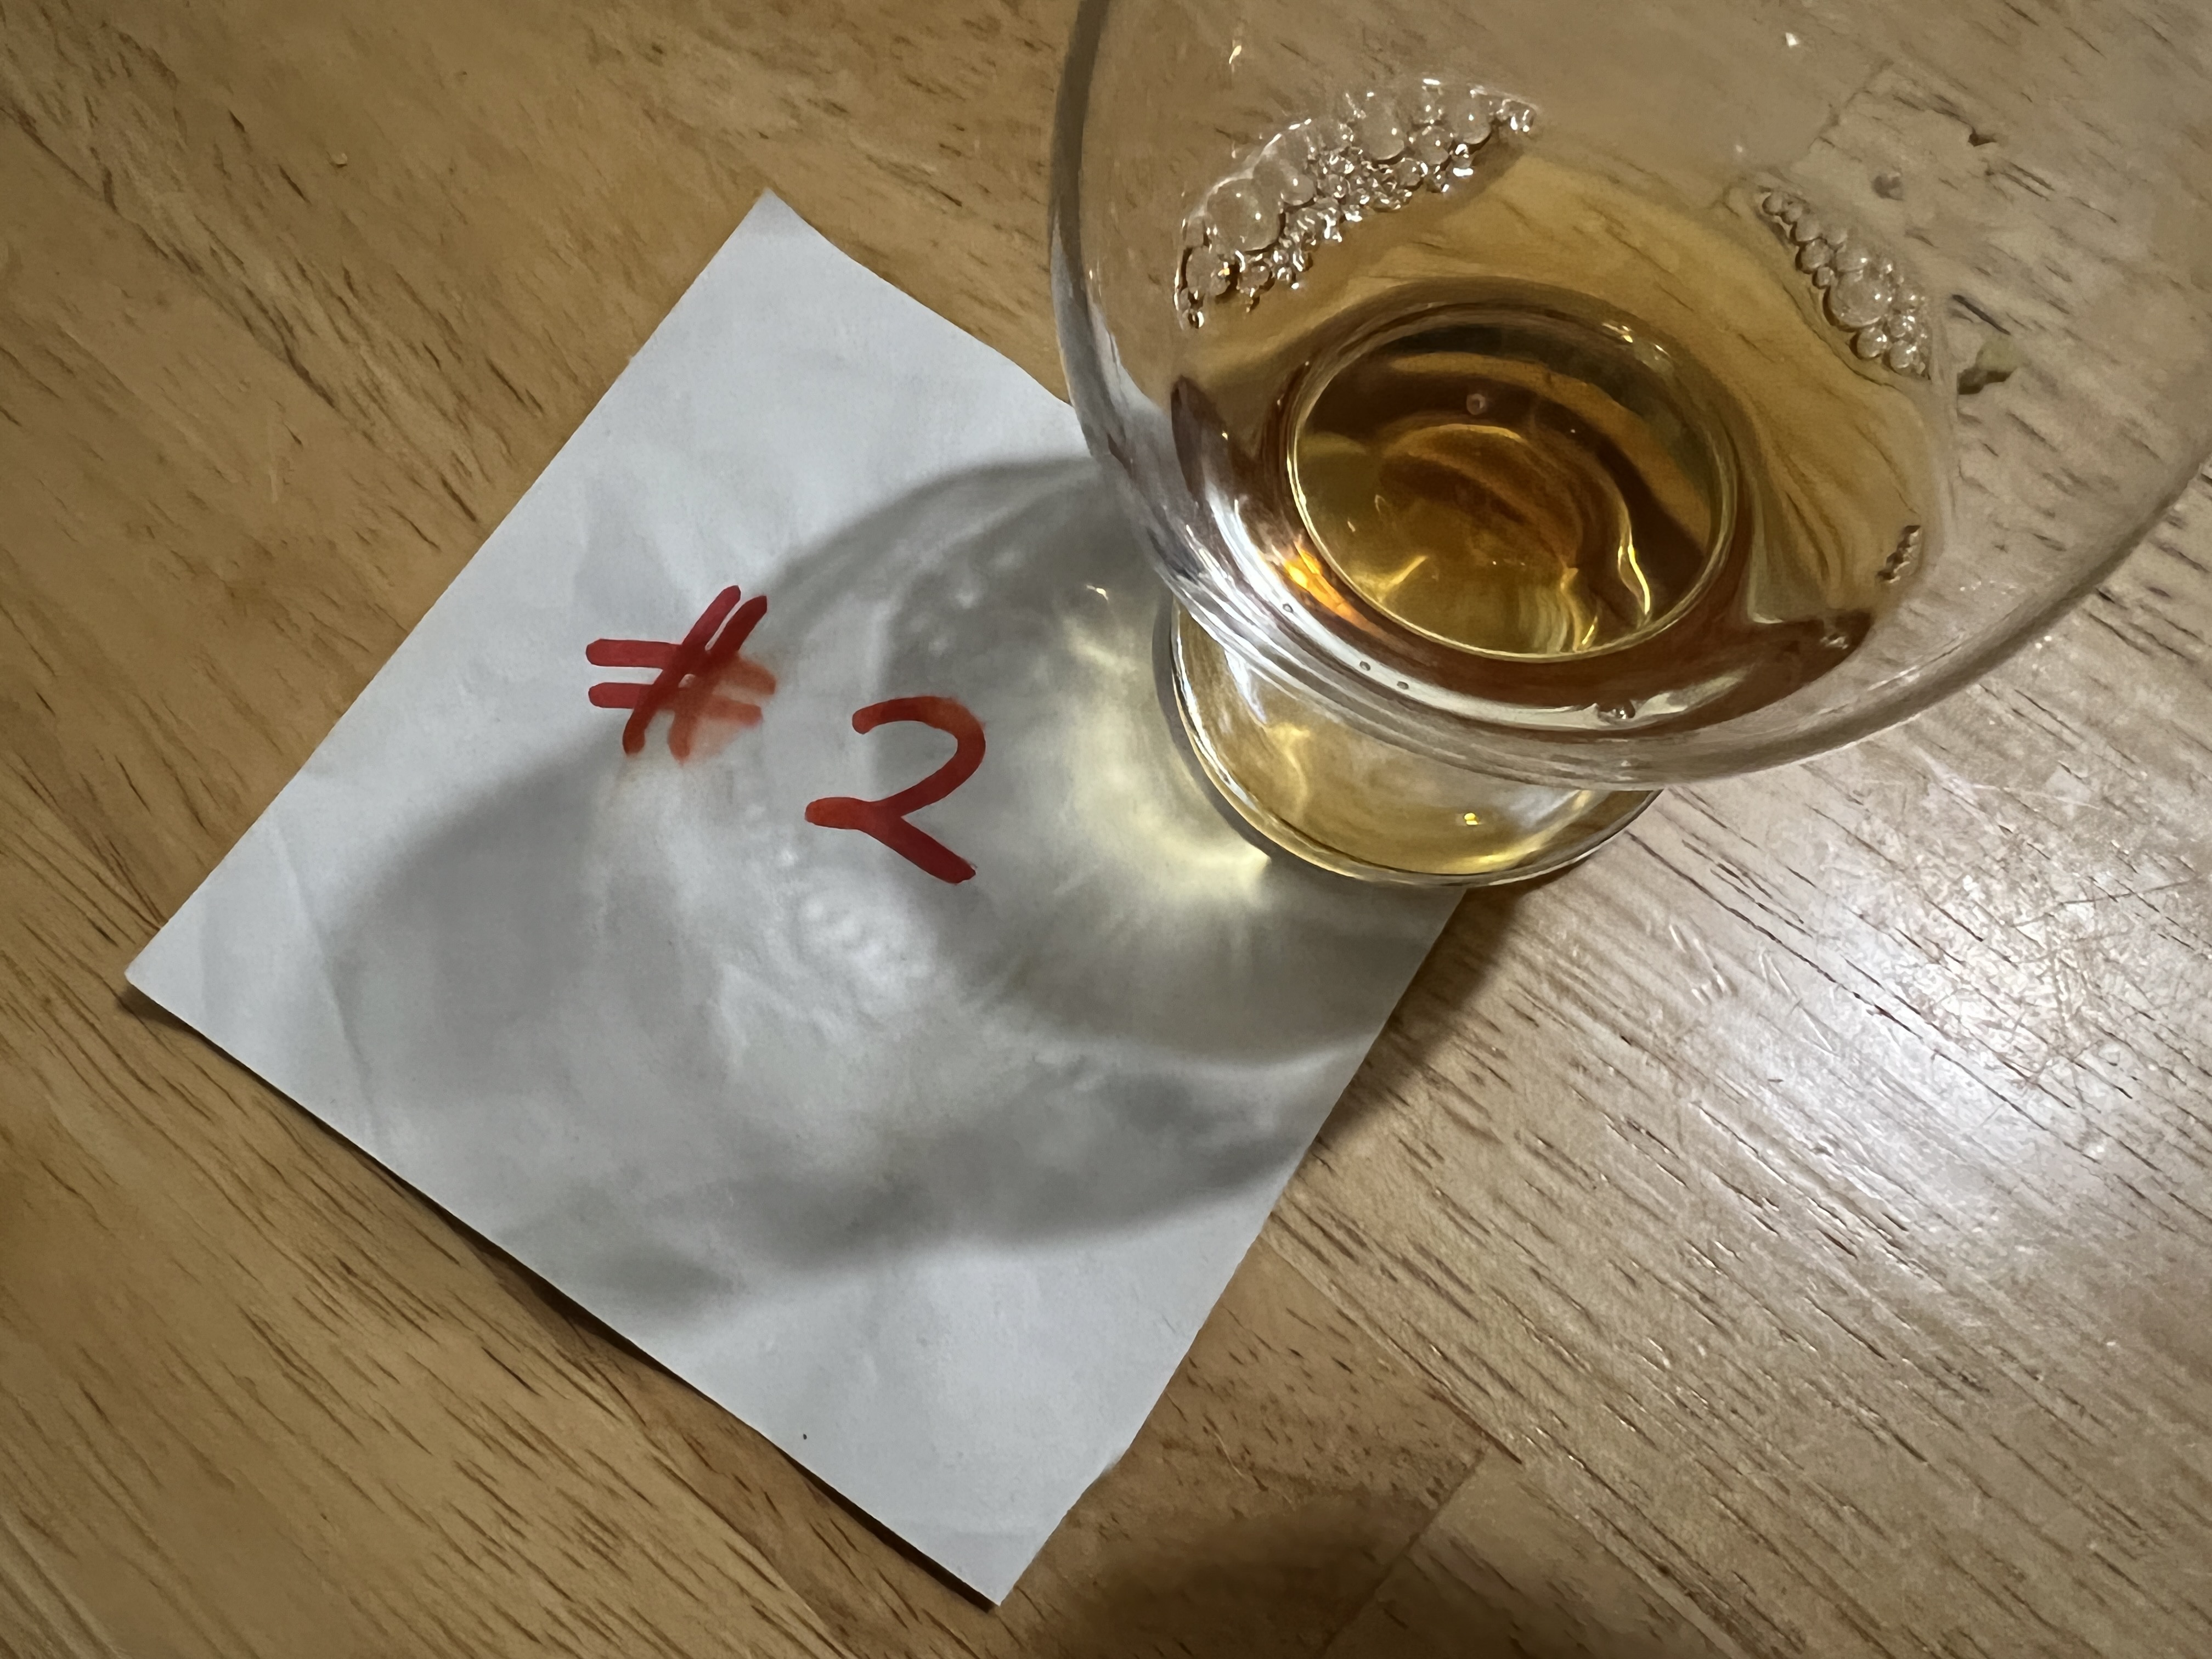 Peated Whisky Blind